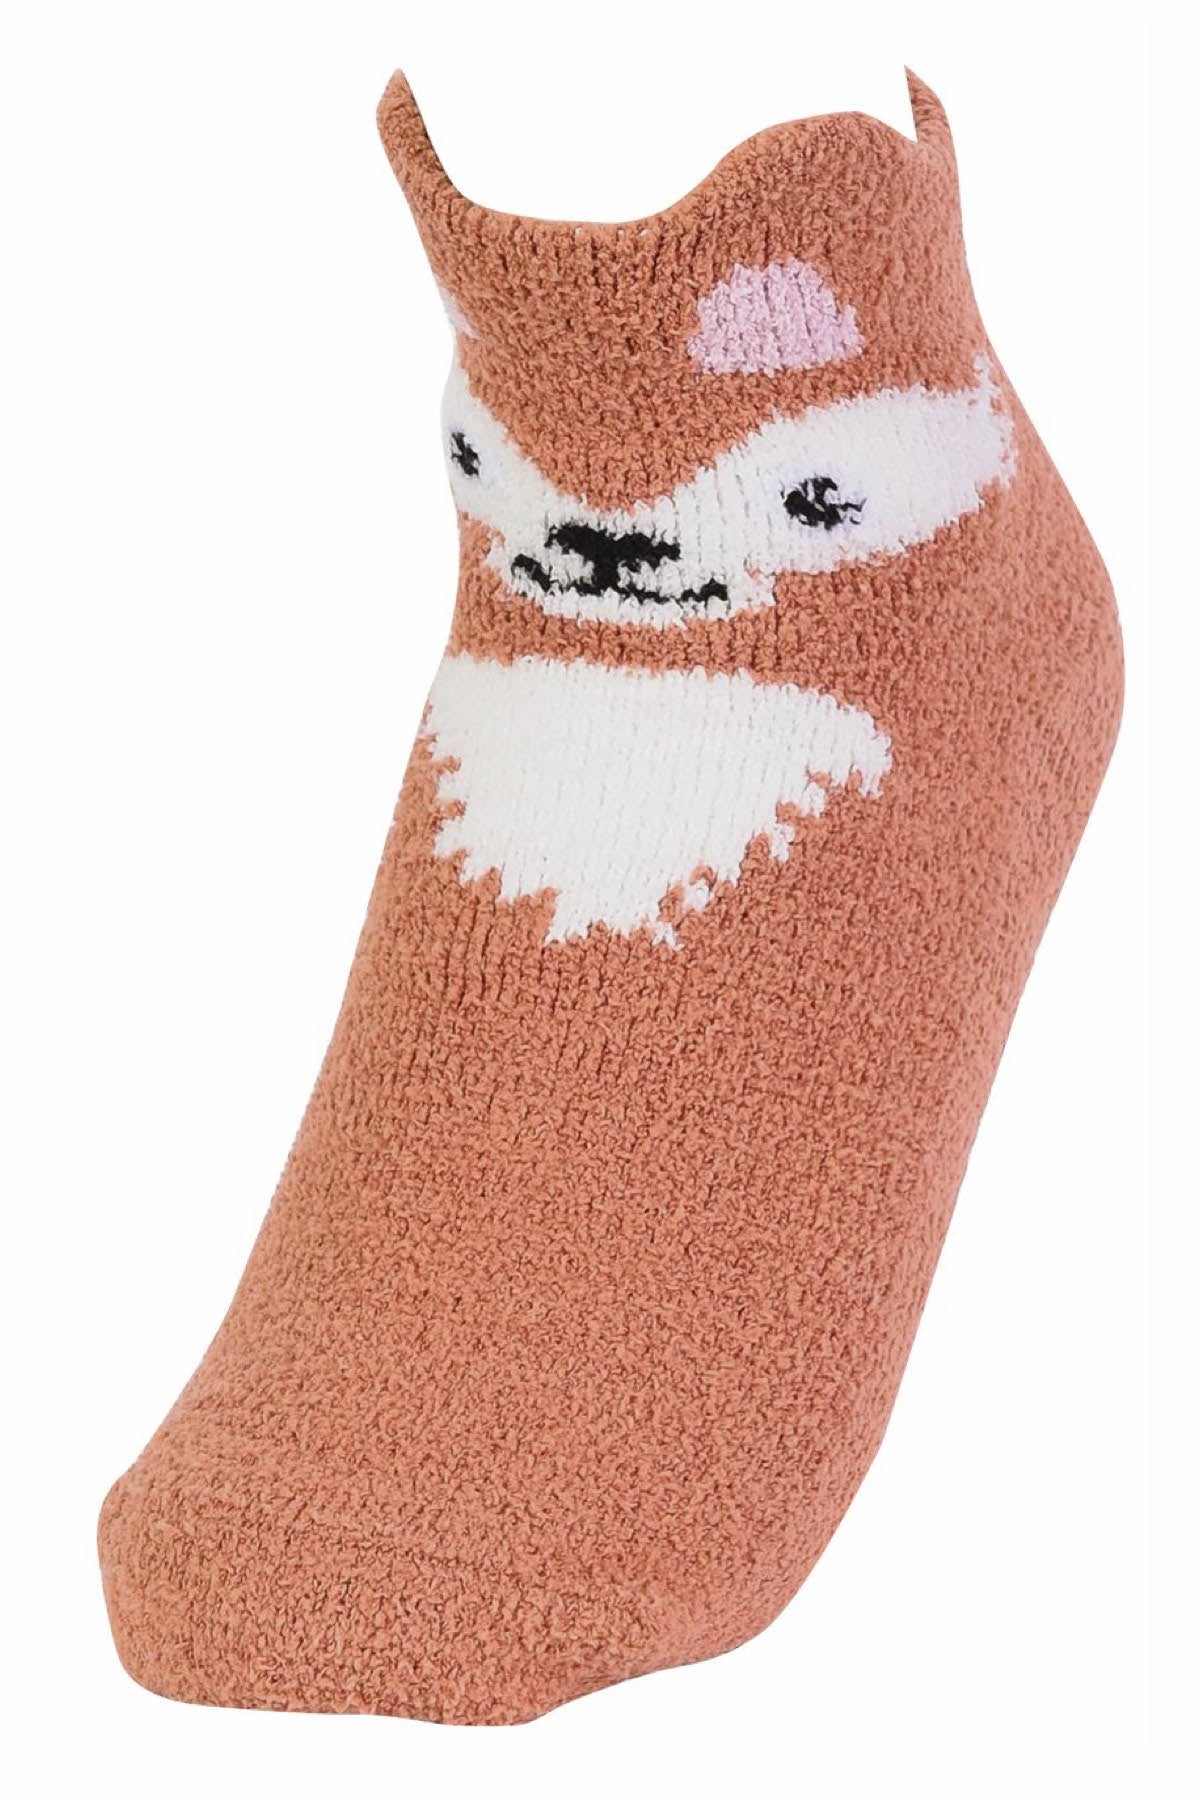 Sofra Brown Fox Cozy Picot Ankle Socks with Grippers